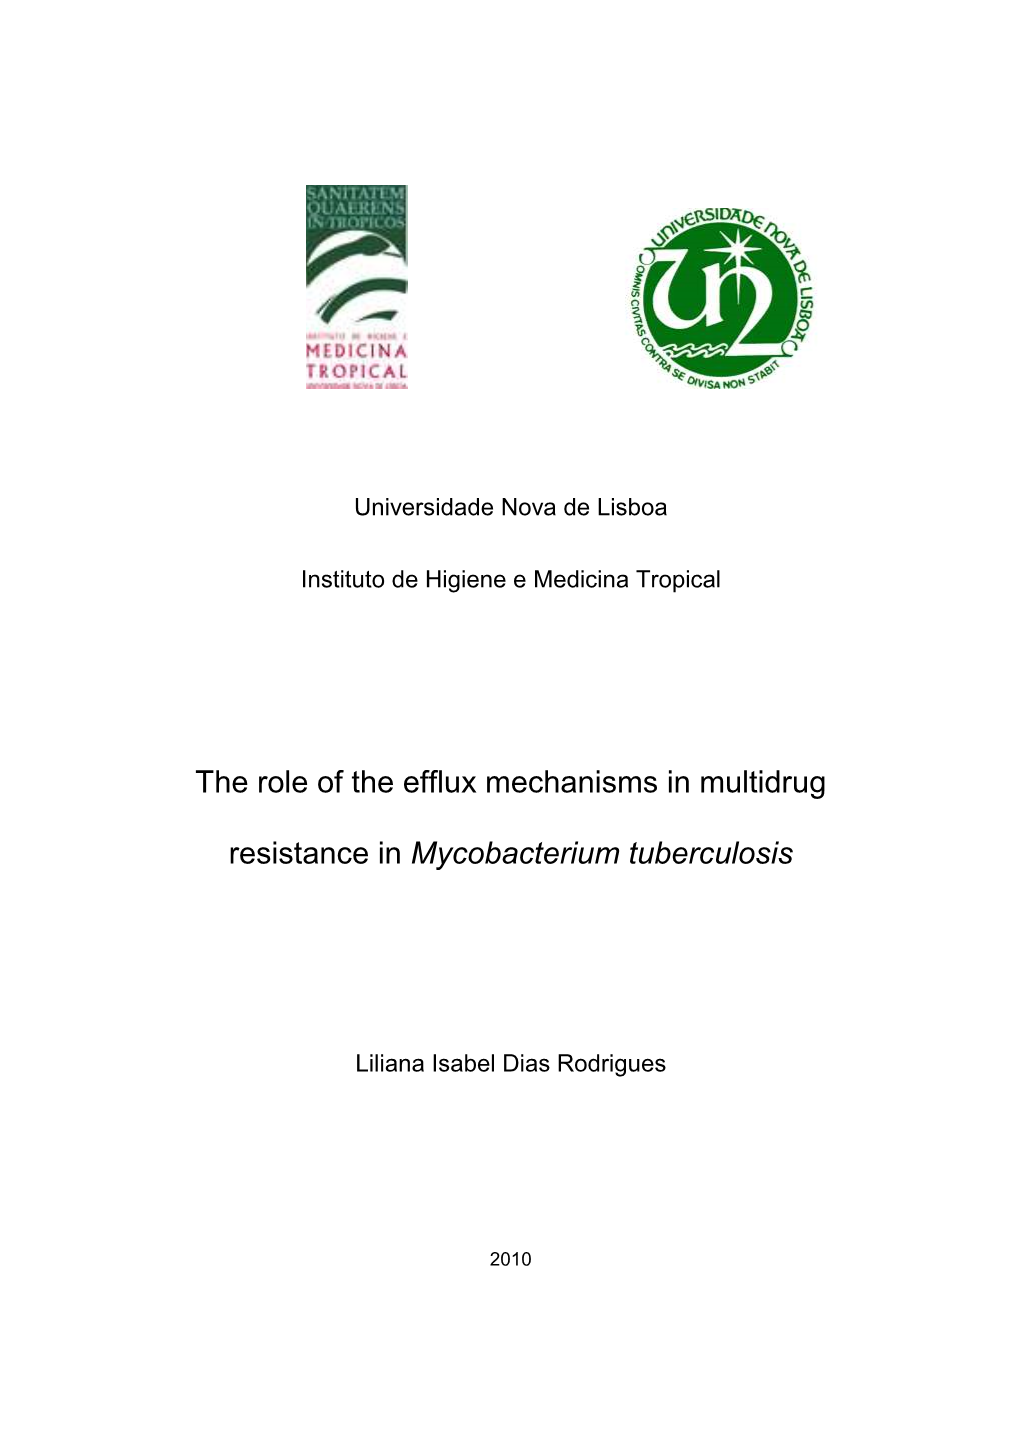 The Role of the Efflux Mechanisms in Multidrug Resistance In